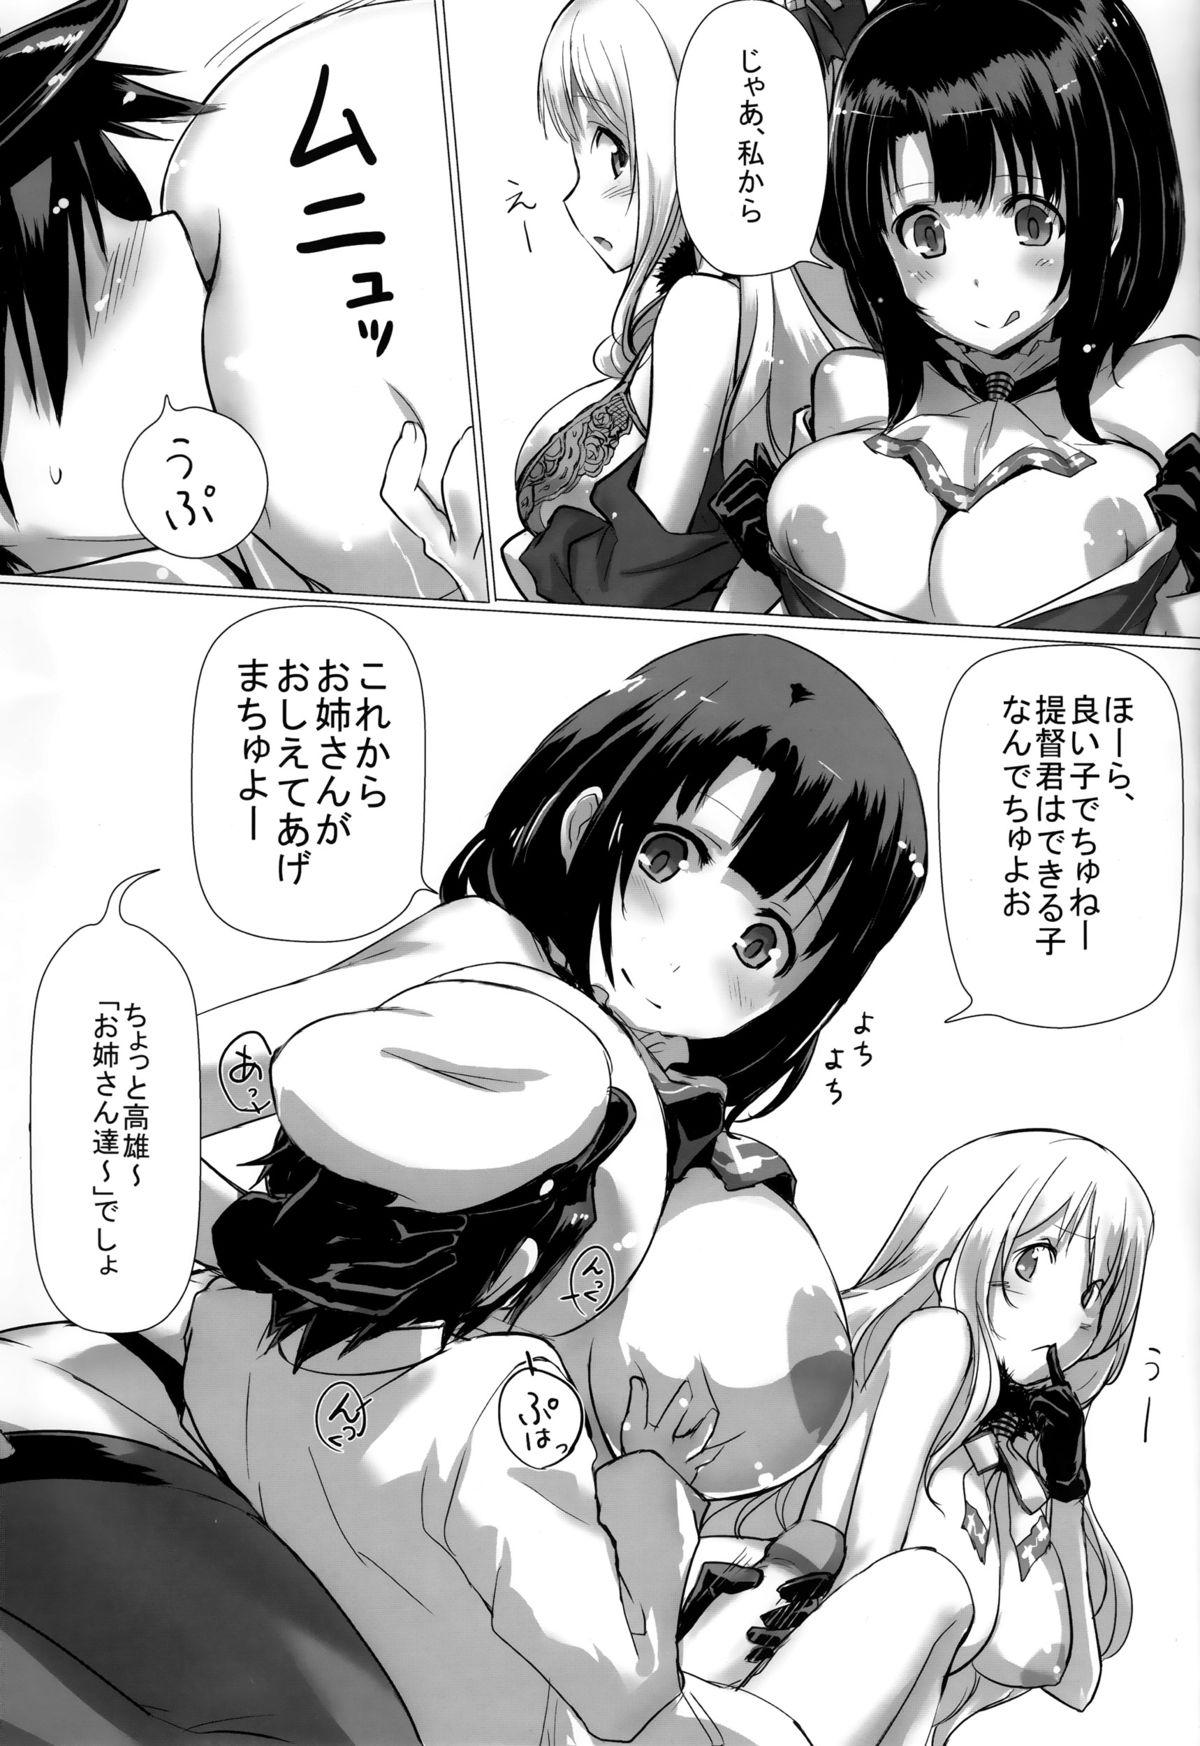 Brunet 高雄と愛宕と提督でHする本 - Kantai collection Sharing - Page 4